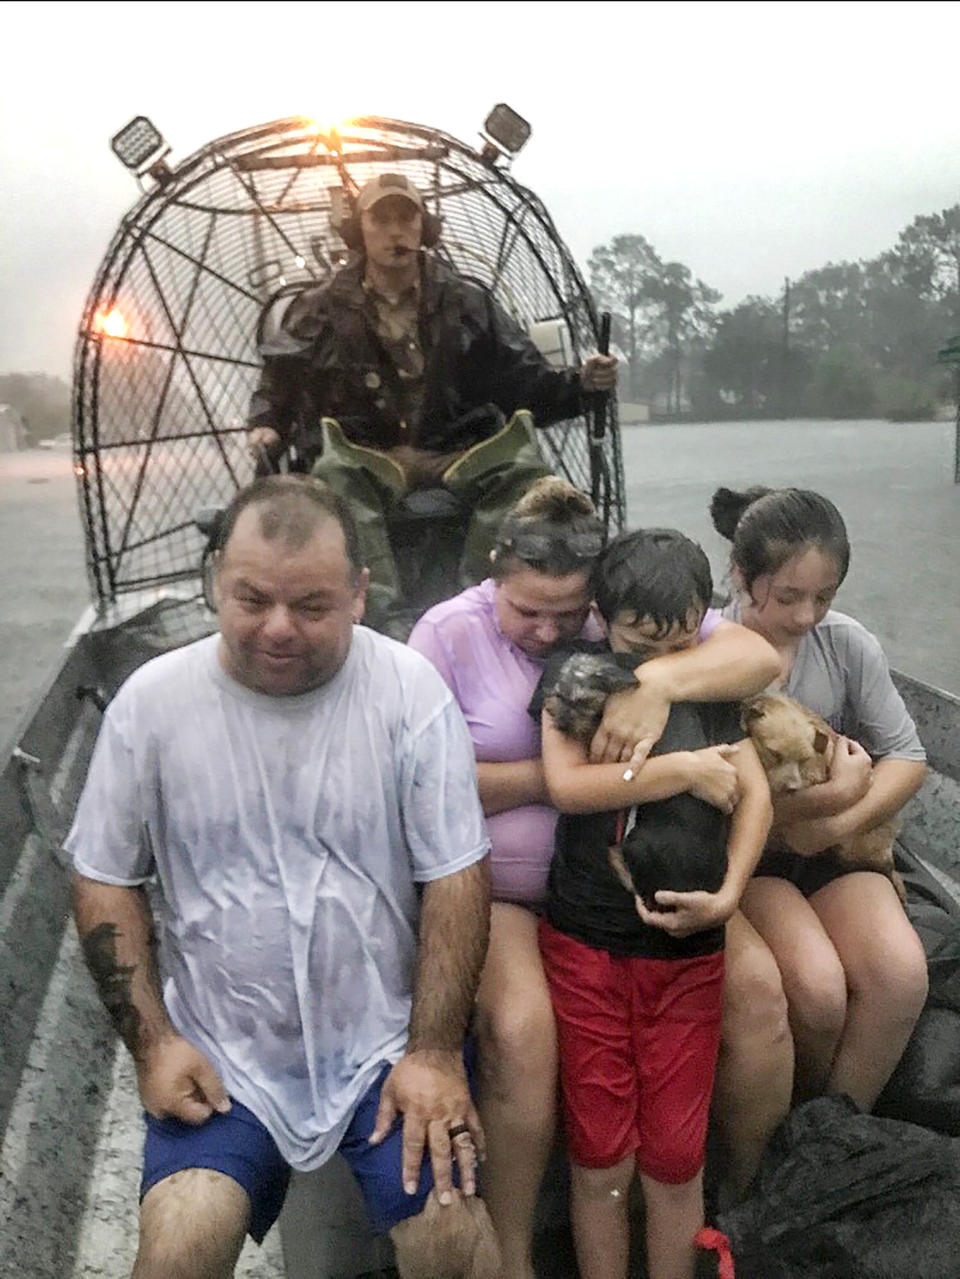 In this photo provided by the Texas Parks &amp; Wildlife Department, a family is rescued via fan boat by a member of the department from the flood waters of Tropical Depression Imelda near Beaumont, Texas, Thursday, Sept. 19, 2019. (Texas Parks &amp; Wildlife Department via AP)